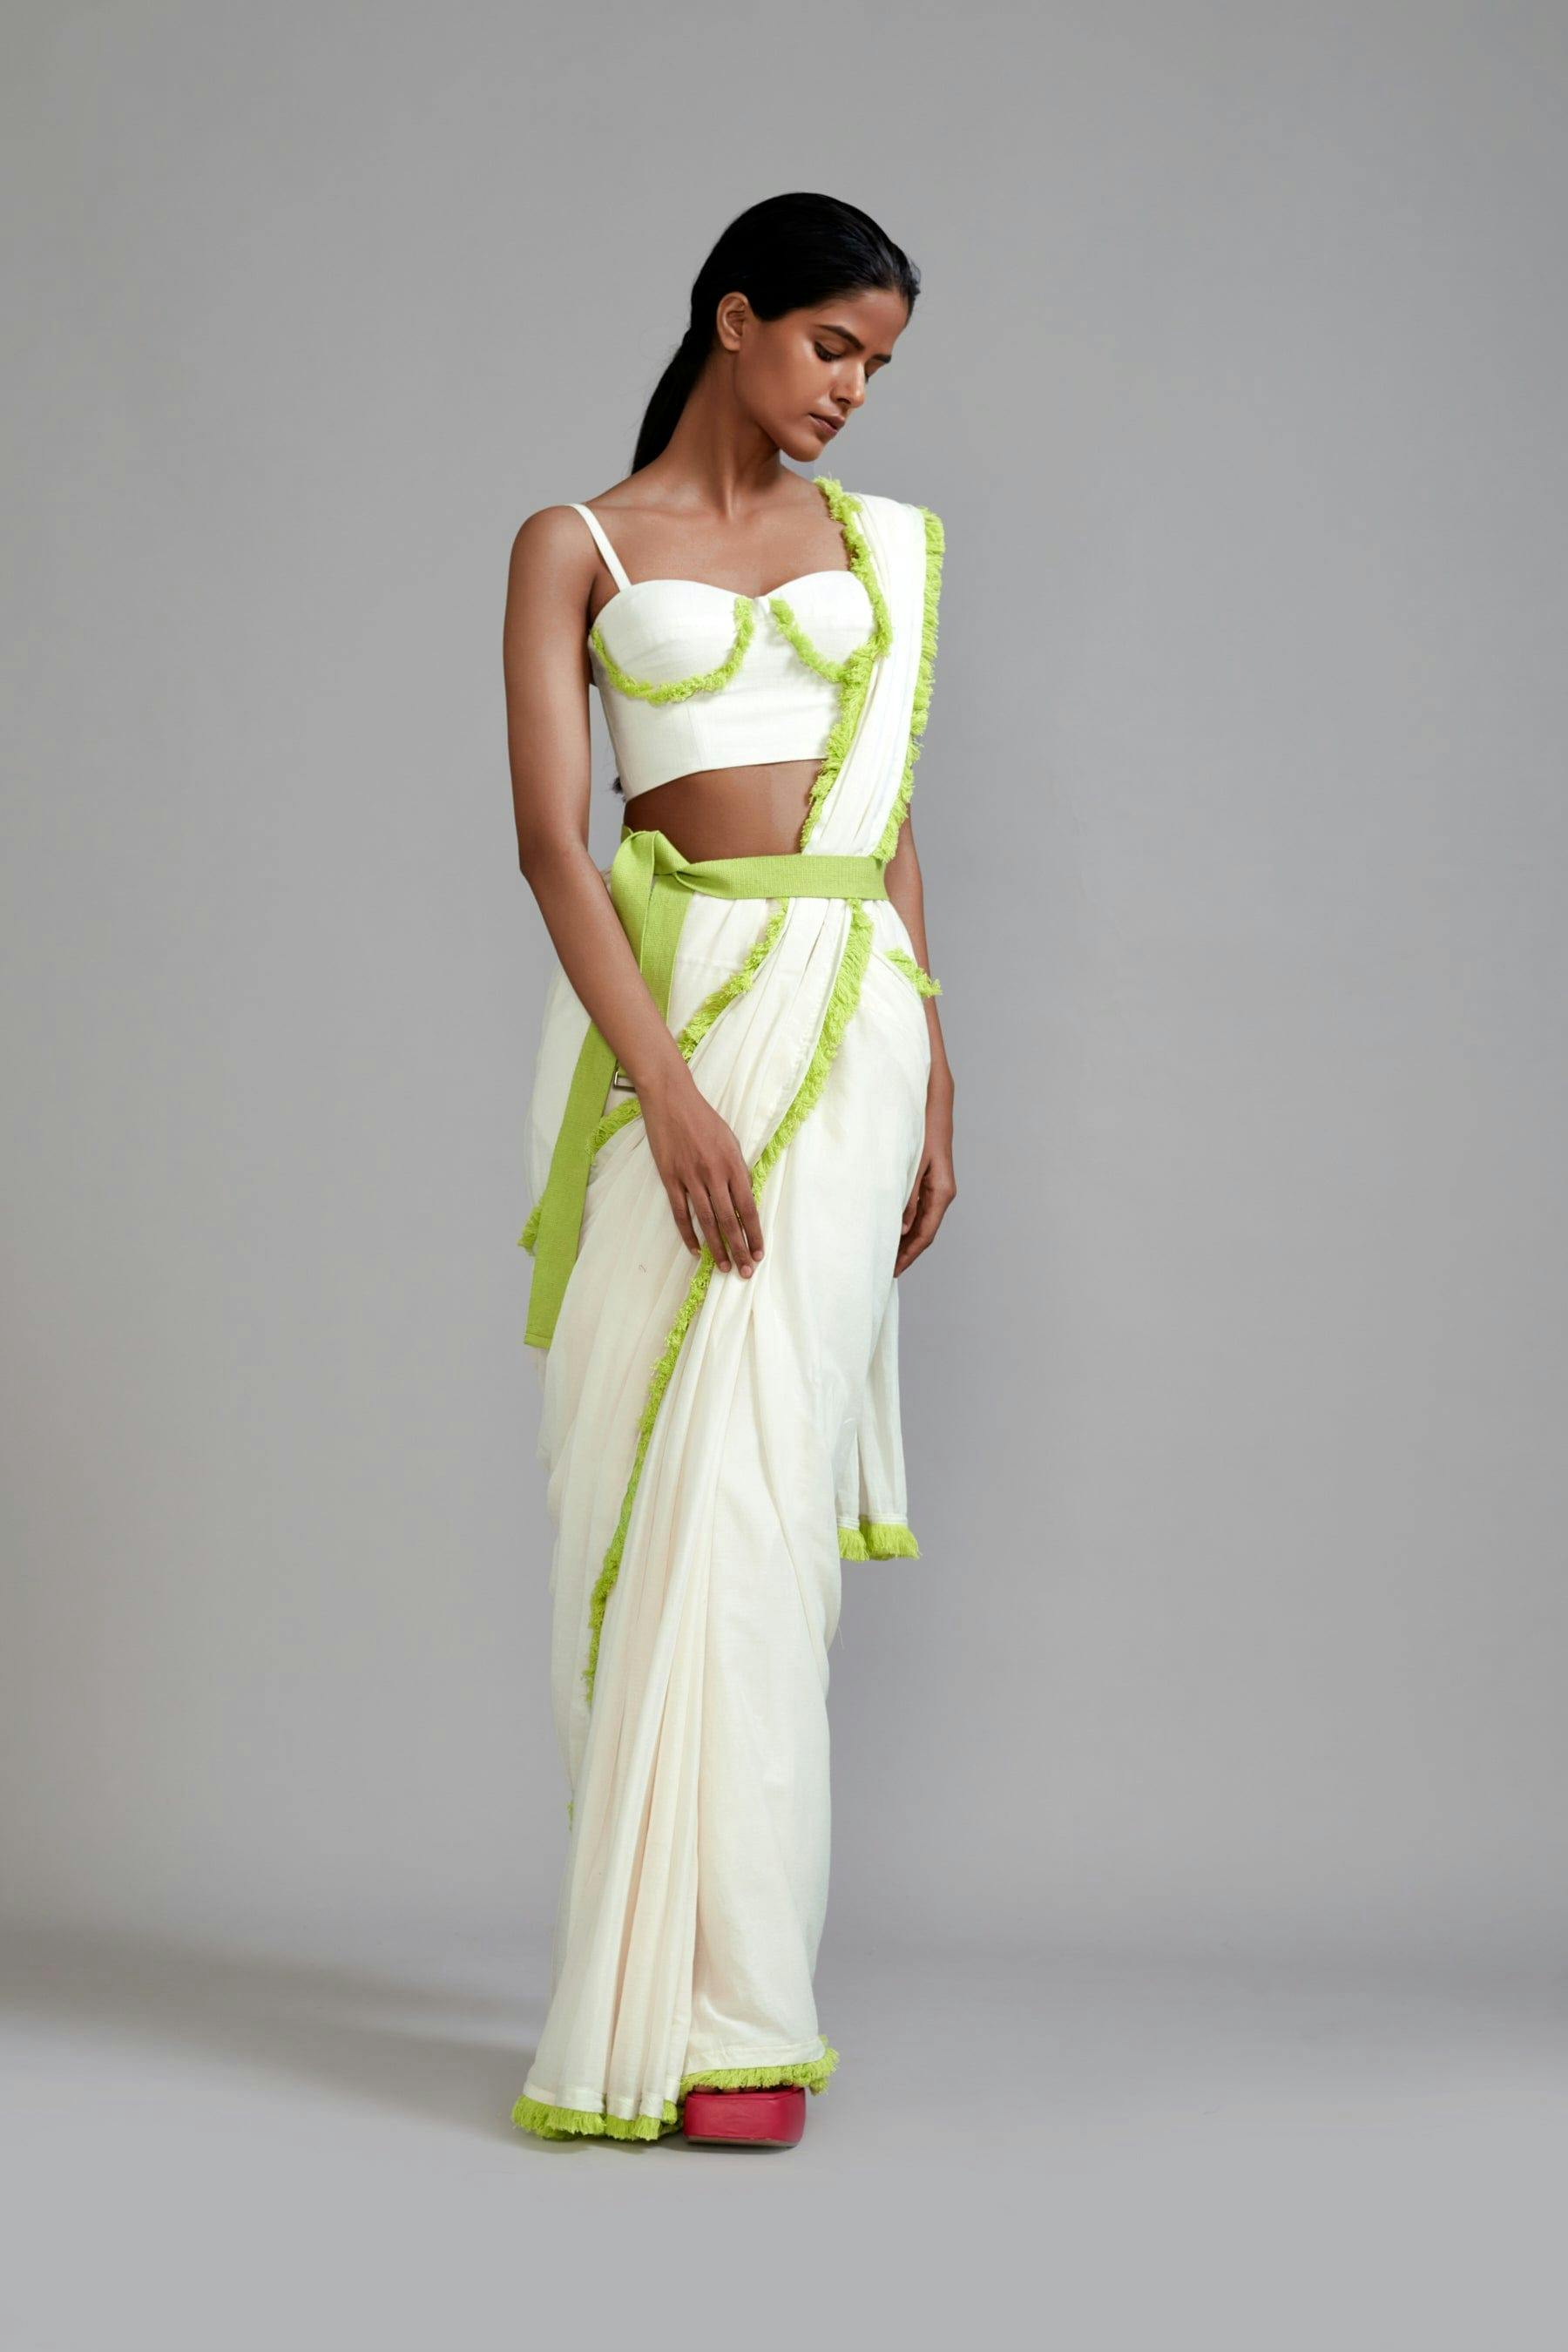 Thumbnail preview #1 for Off-White with Neon Green Saree & Fringed Corset Set (2 PCS)